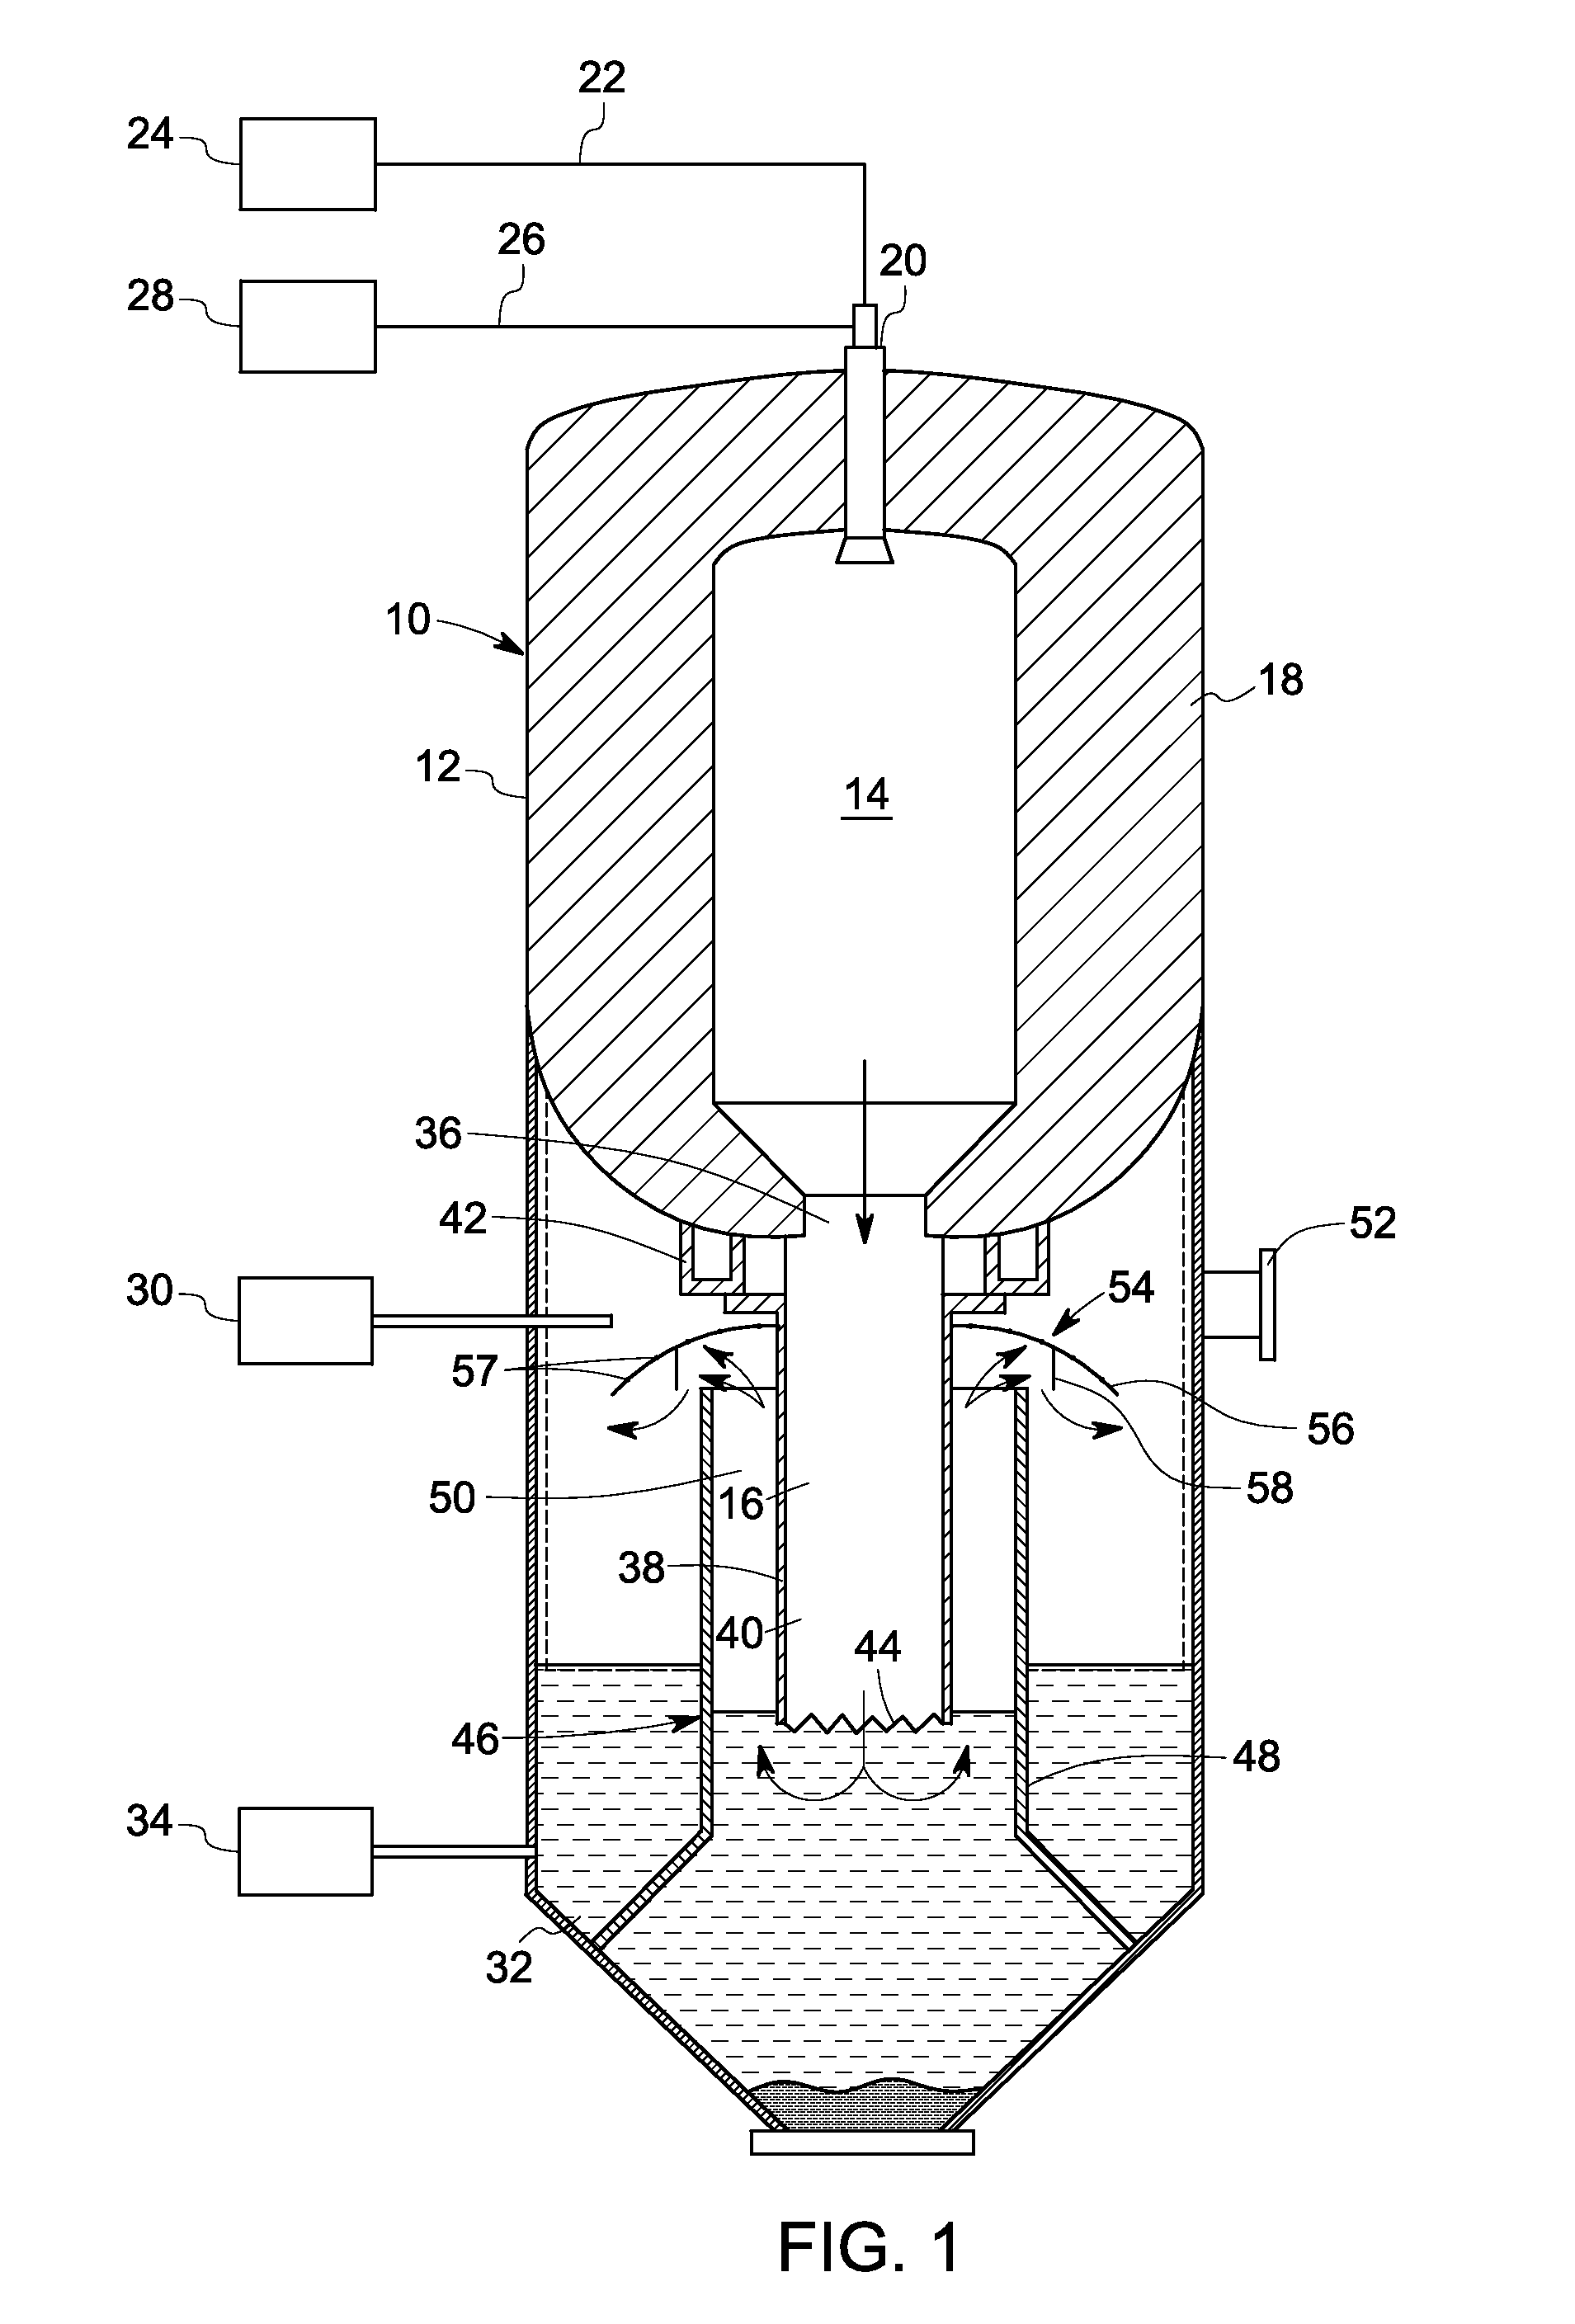 Cooling chamber assembly for a gasifier